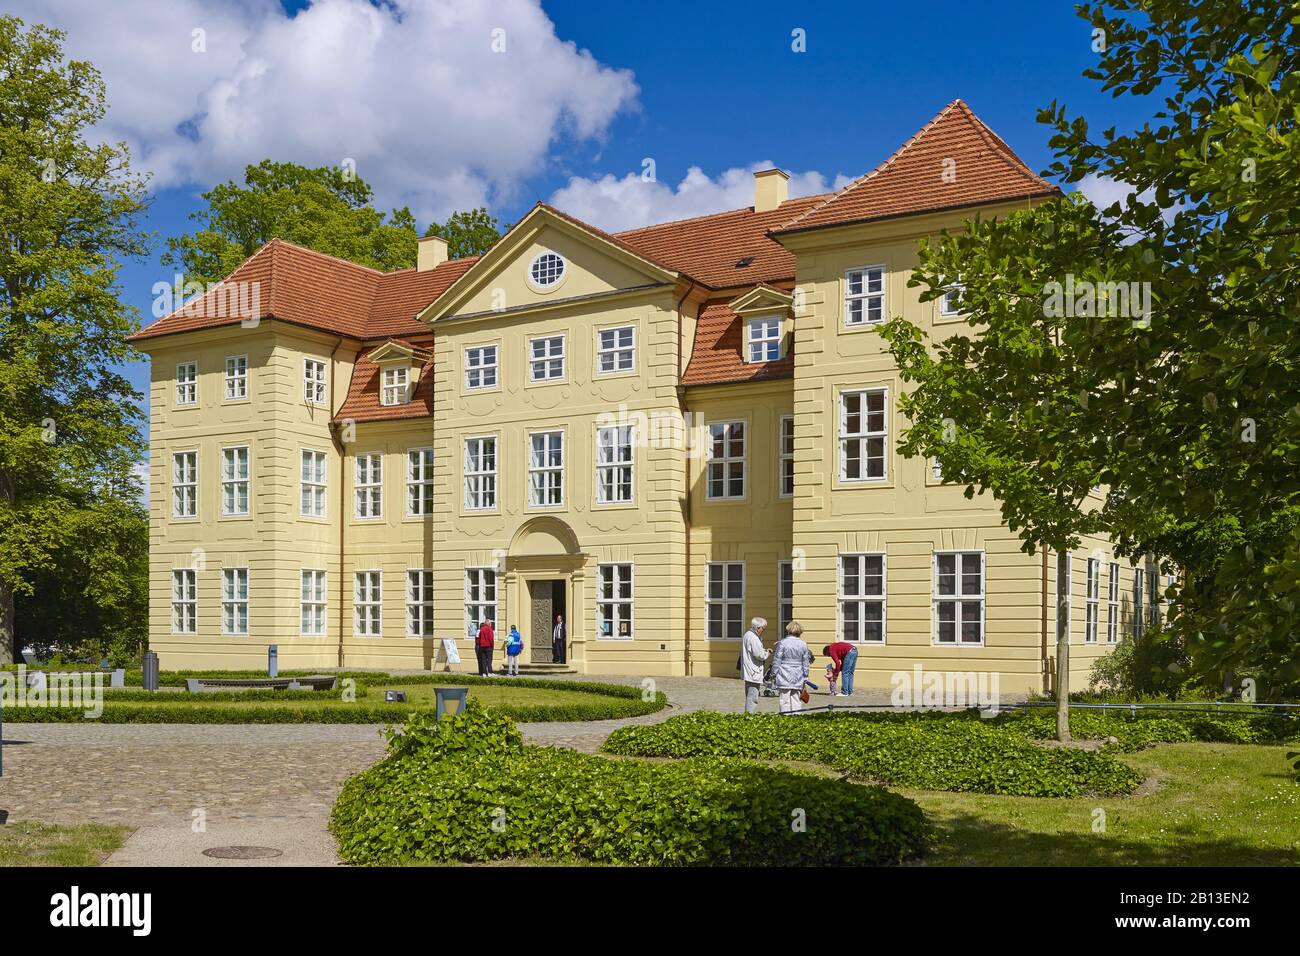 Mirow Castle on the Castle Island in Mirow,Mecklenburg-Vorpommern,Germany <br> Mirow Castle on Castle Island in Mirow,Mecklenburg Western Pomerania,Germany Stock Photo